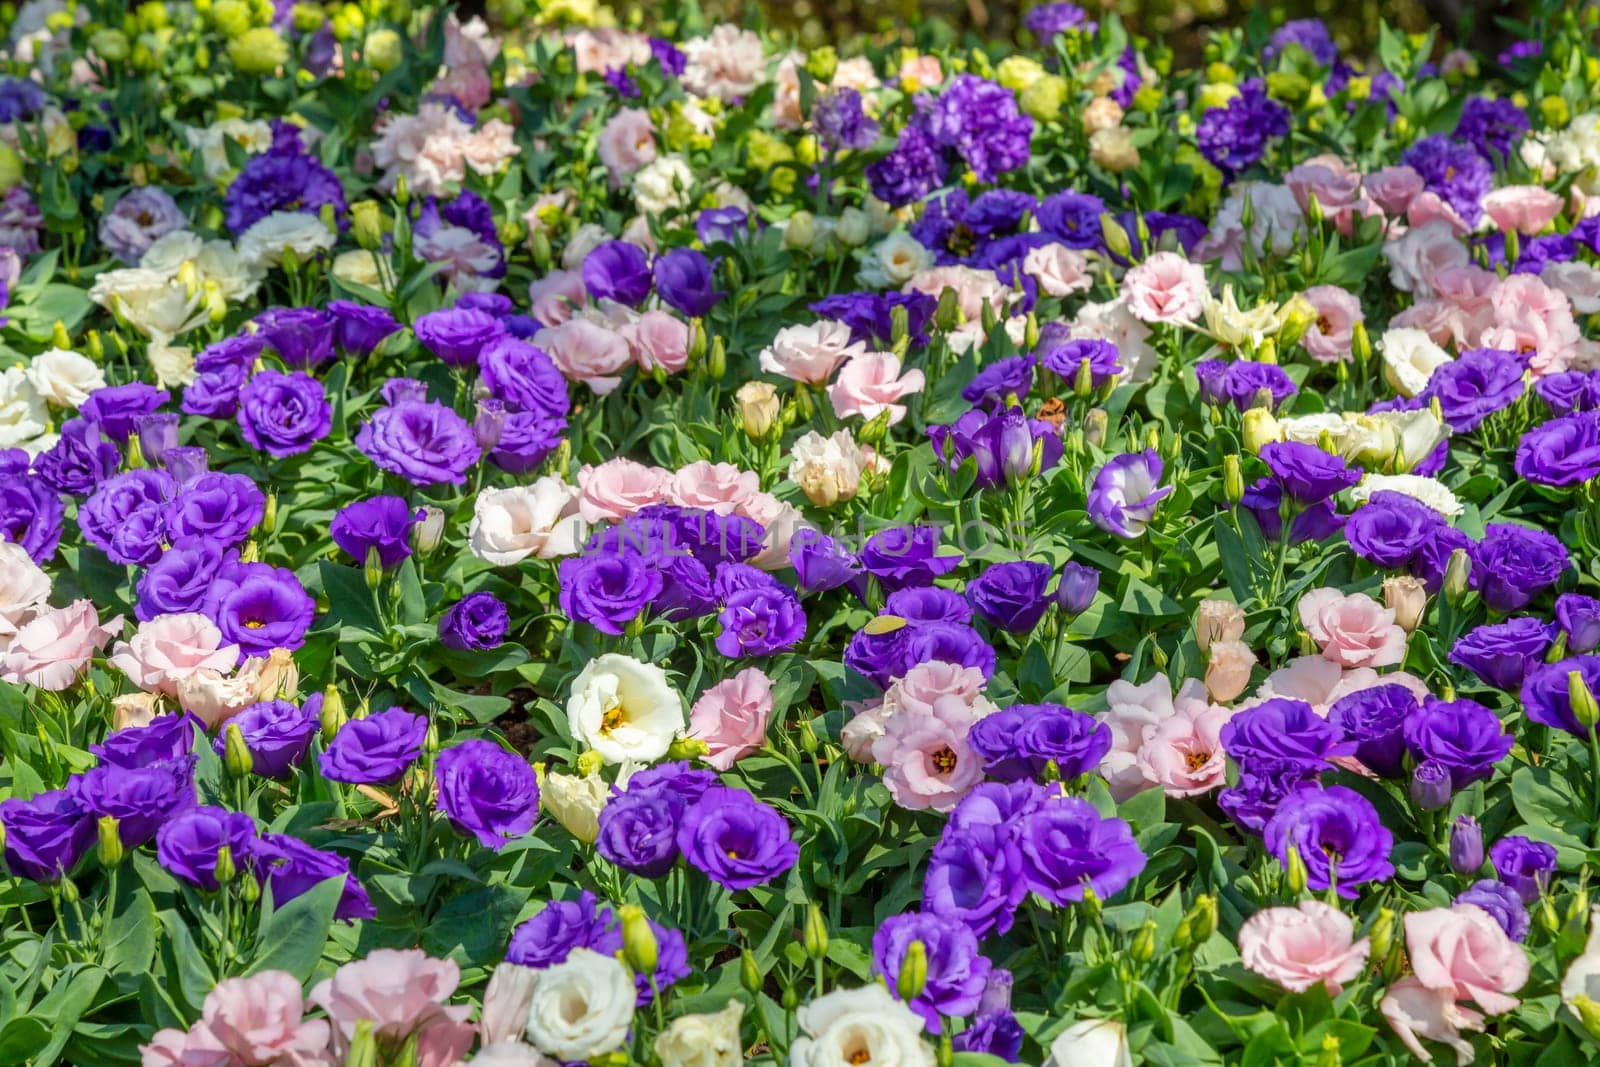 The Lisianthus flowers or Eustoma plants blossom in flower garden. by Gamjai